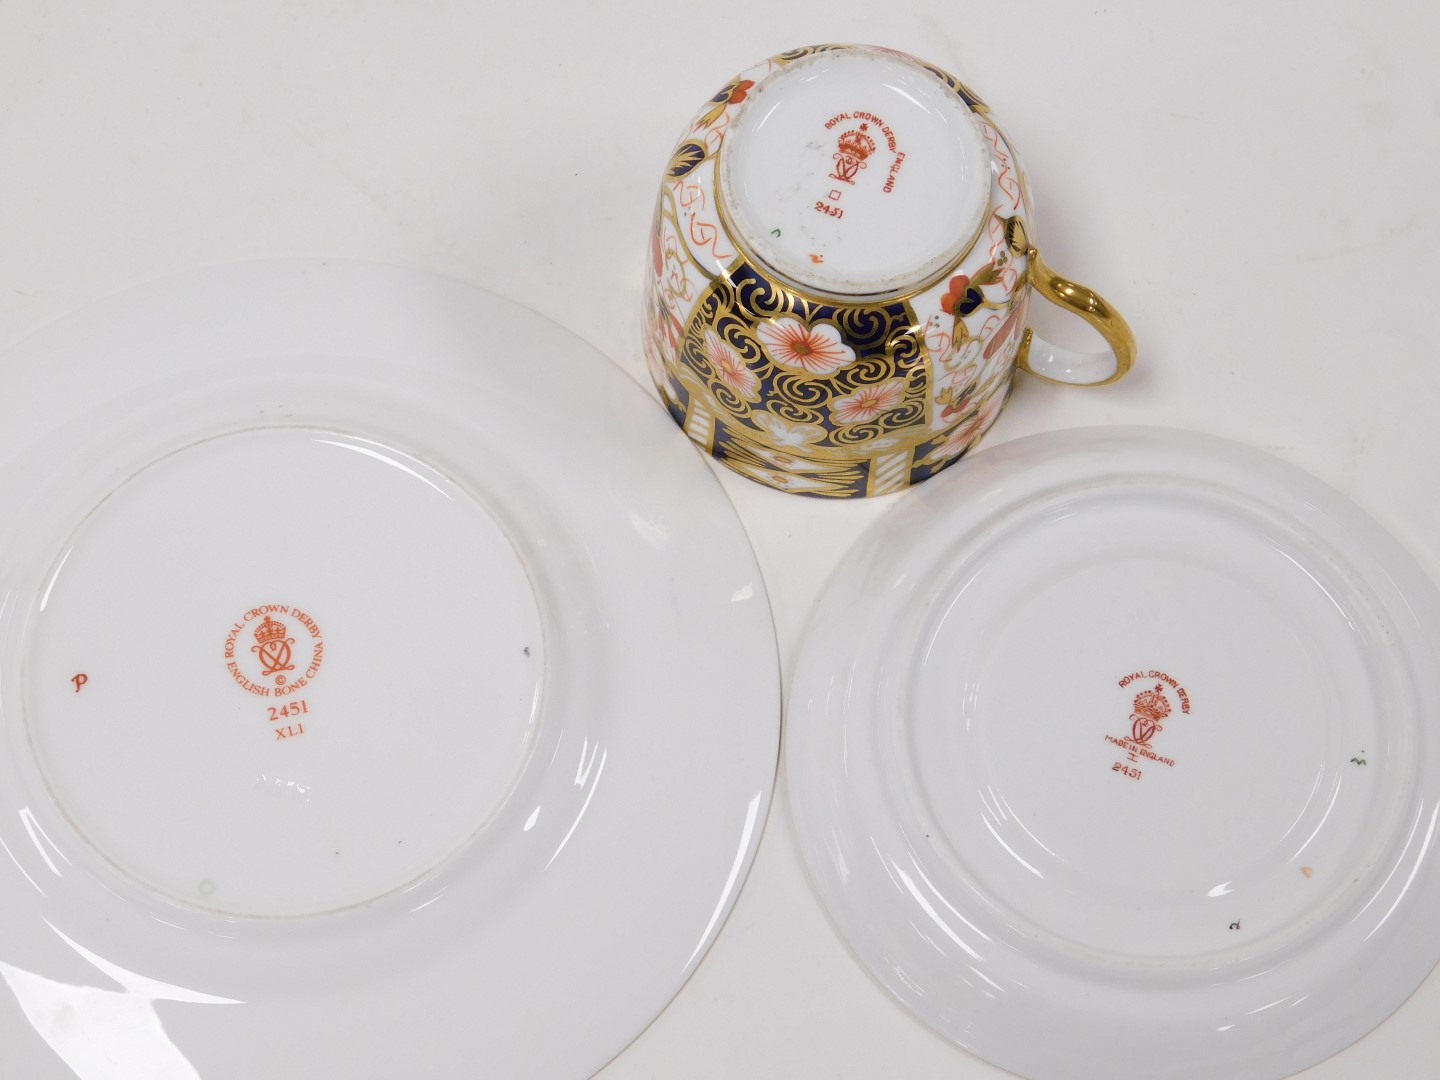 A Royal Crown Derby Imari porcelain trio, pattern number 2451, printed marks, comprising cup, saucer - Image 4 of 4